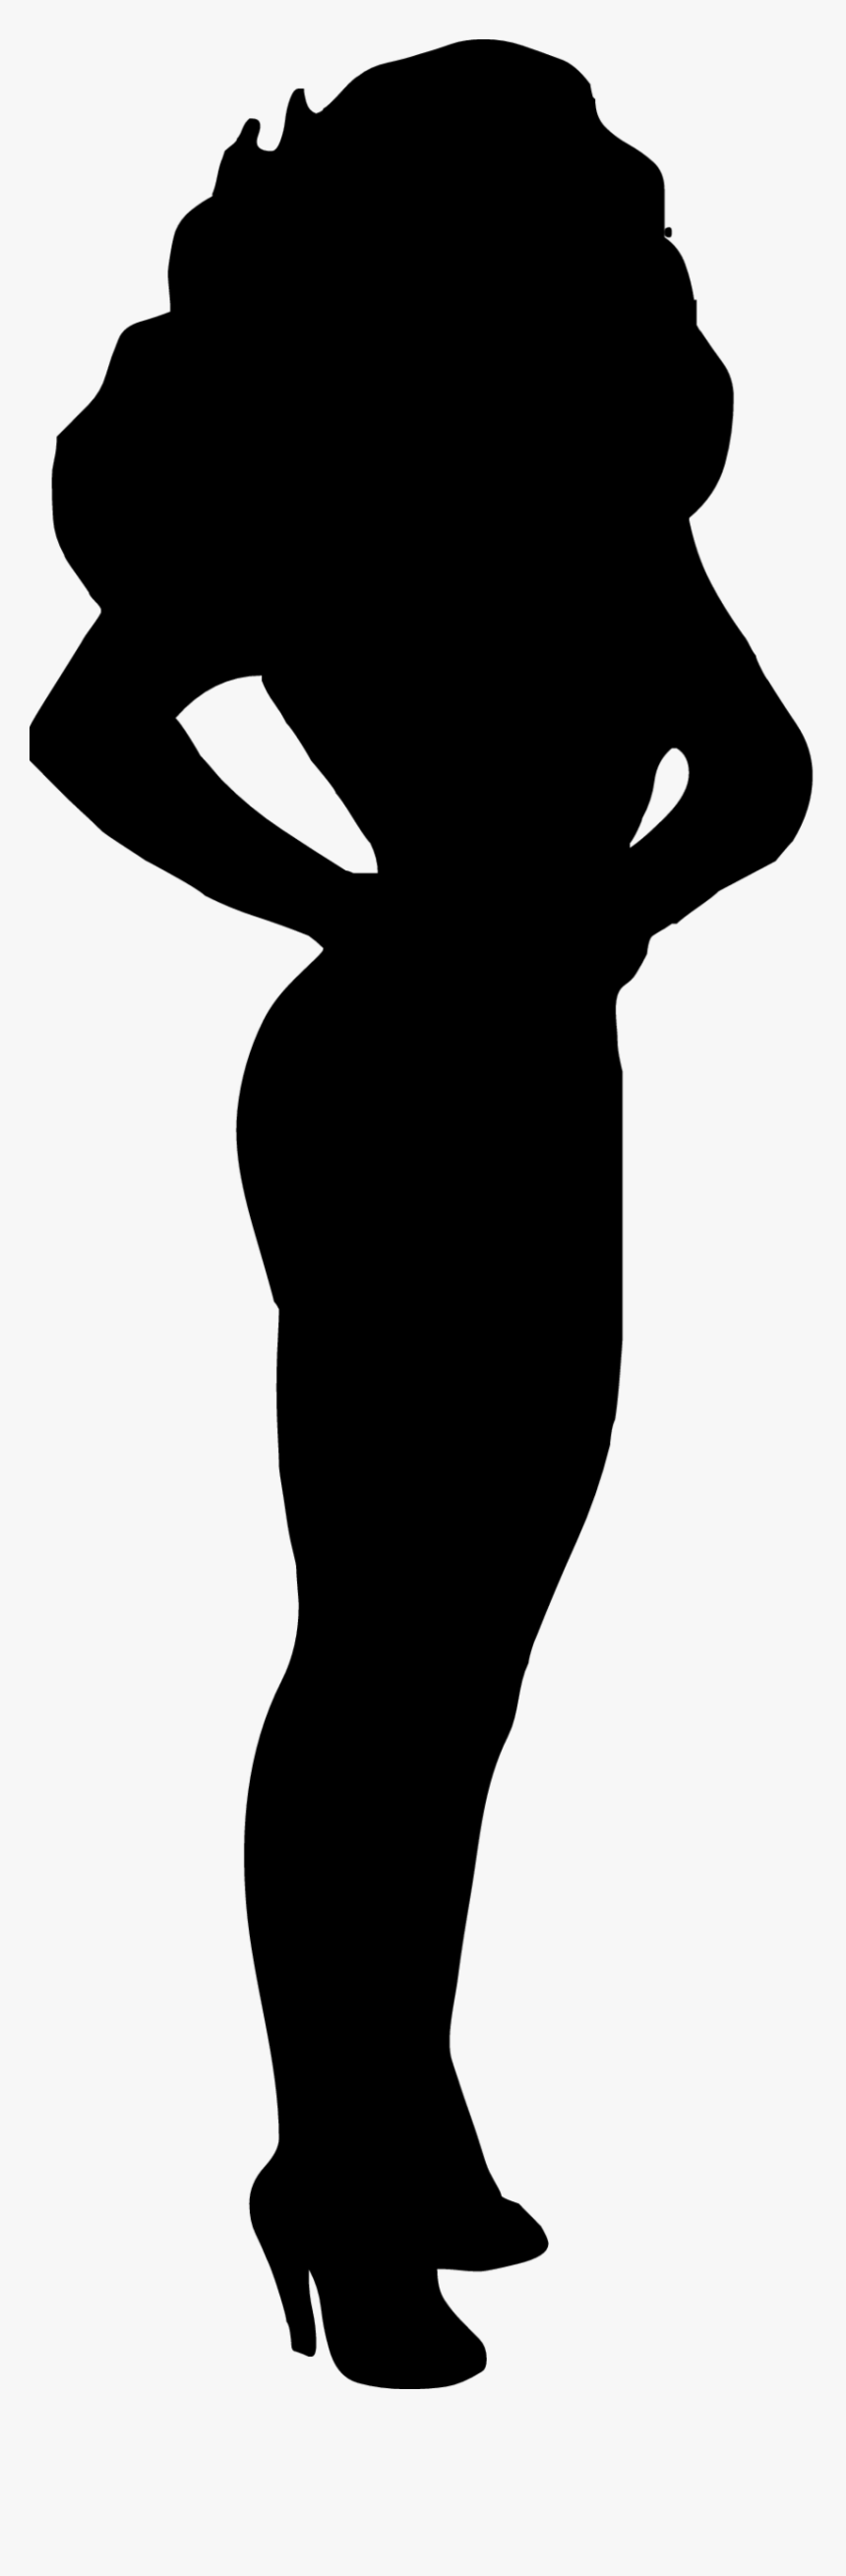 Ariel The Prince Tinker Bell Disney Princess Silhouette, HD Png ...